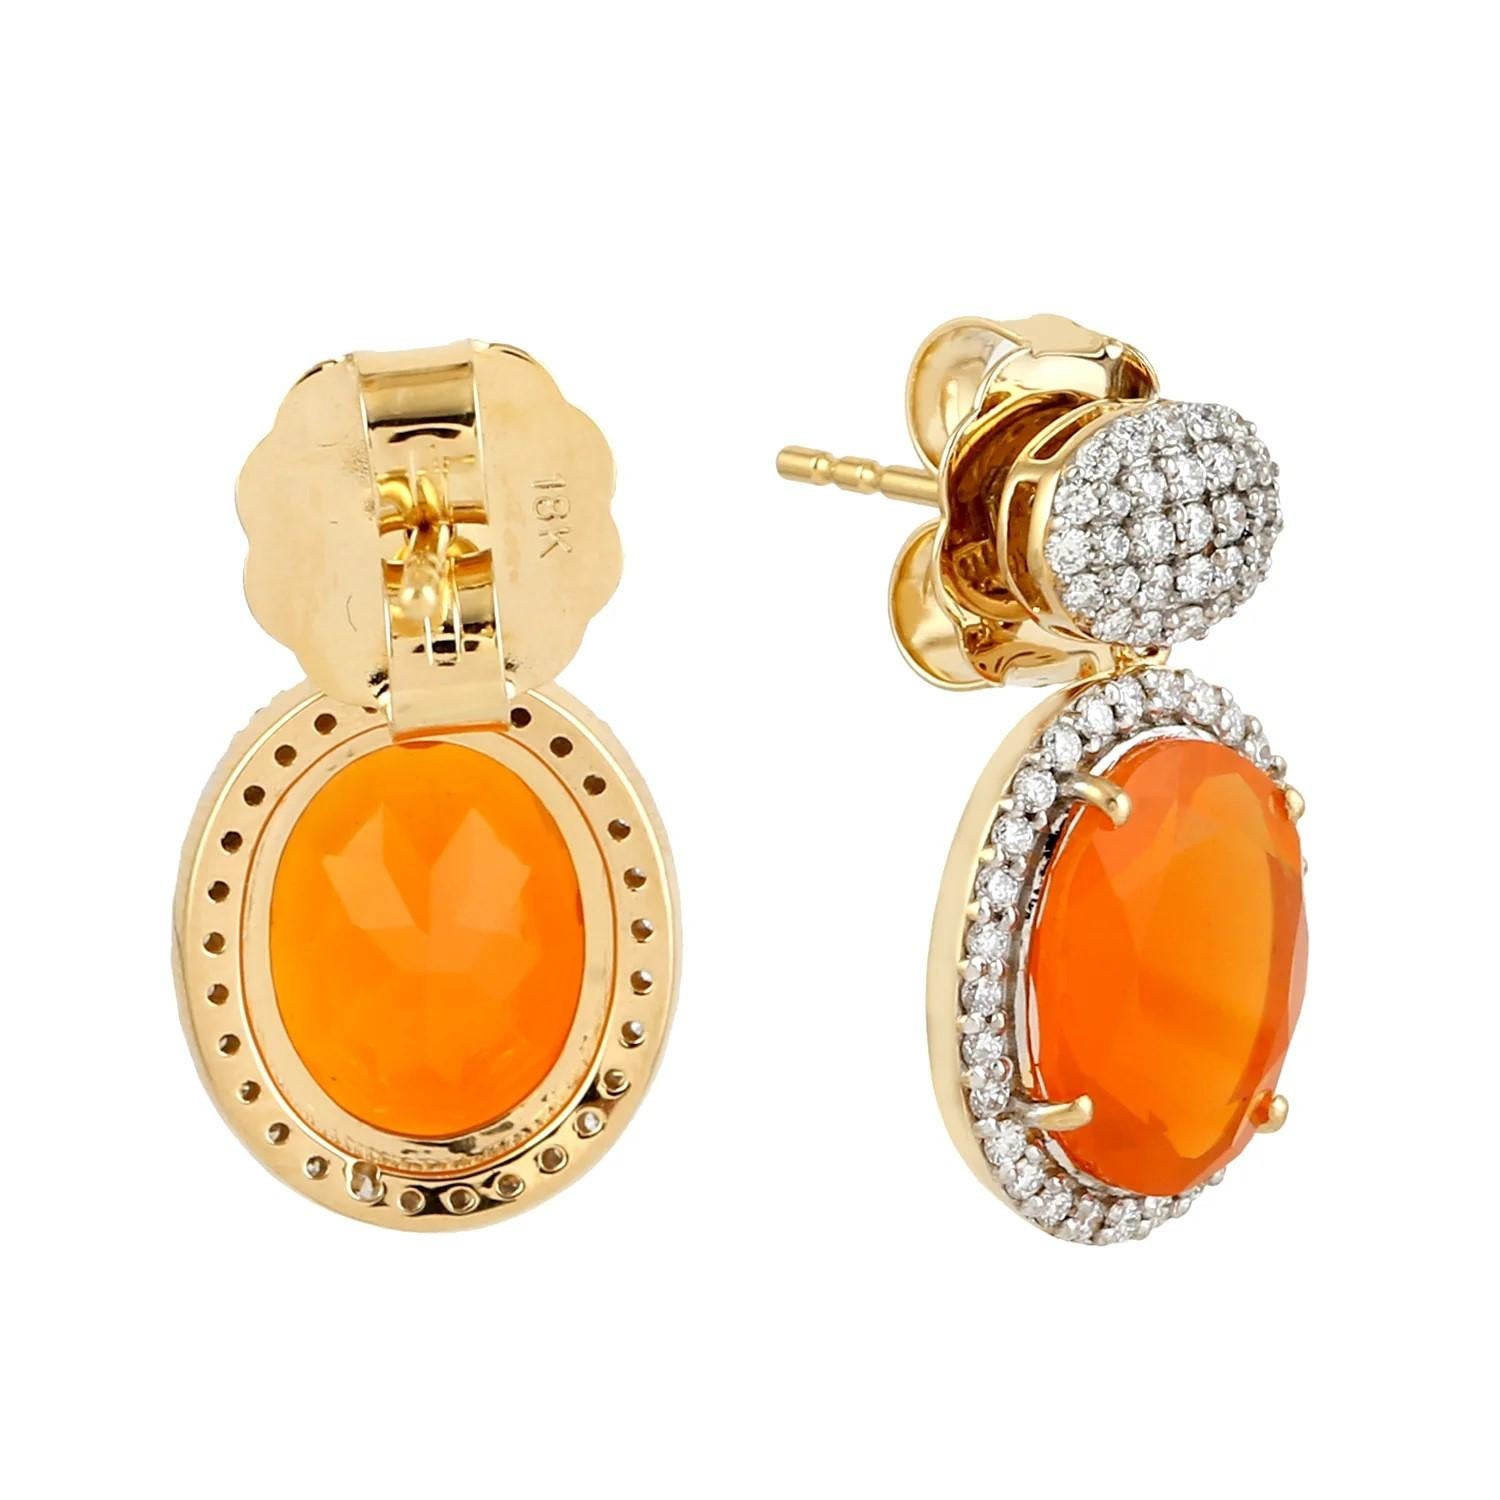 Cast in 14 karat gold, these exquisite earrings are hand set with 4.58 carats fire opal and .68 carats of glimmering diamonds. 

FOLLOW MEGHNA JEWELS storefront to view the latest collection & exclusive pieces. Meghna Jewels is proudly rated as a